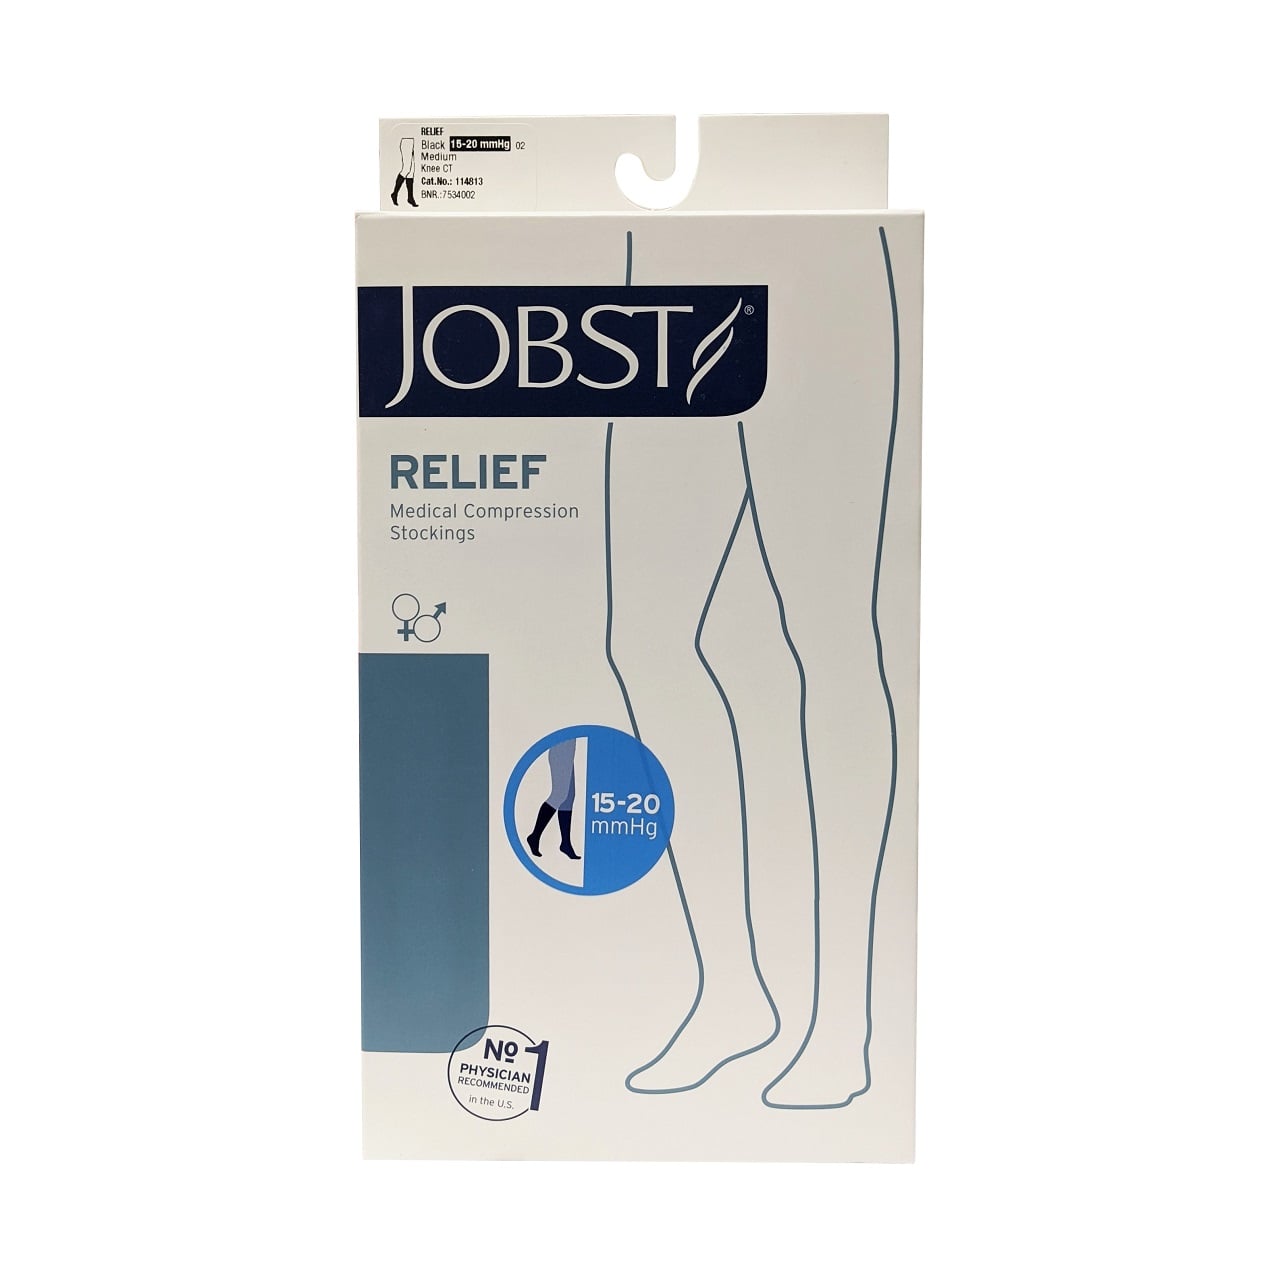 Product label for Jobst Relief Compression Socks 15-20 mmHg - Knee High / Closed Toe / Black (Medium)